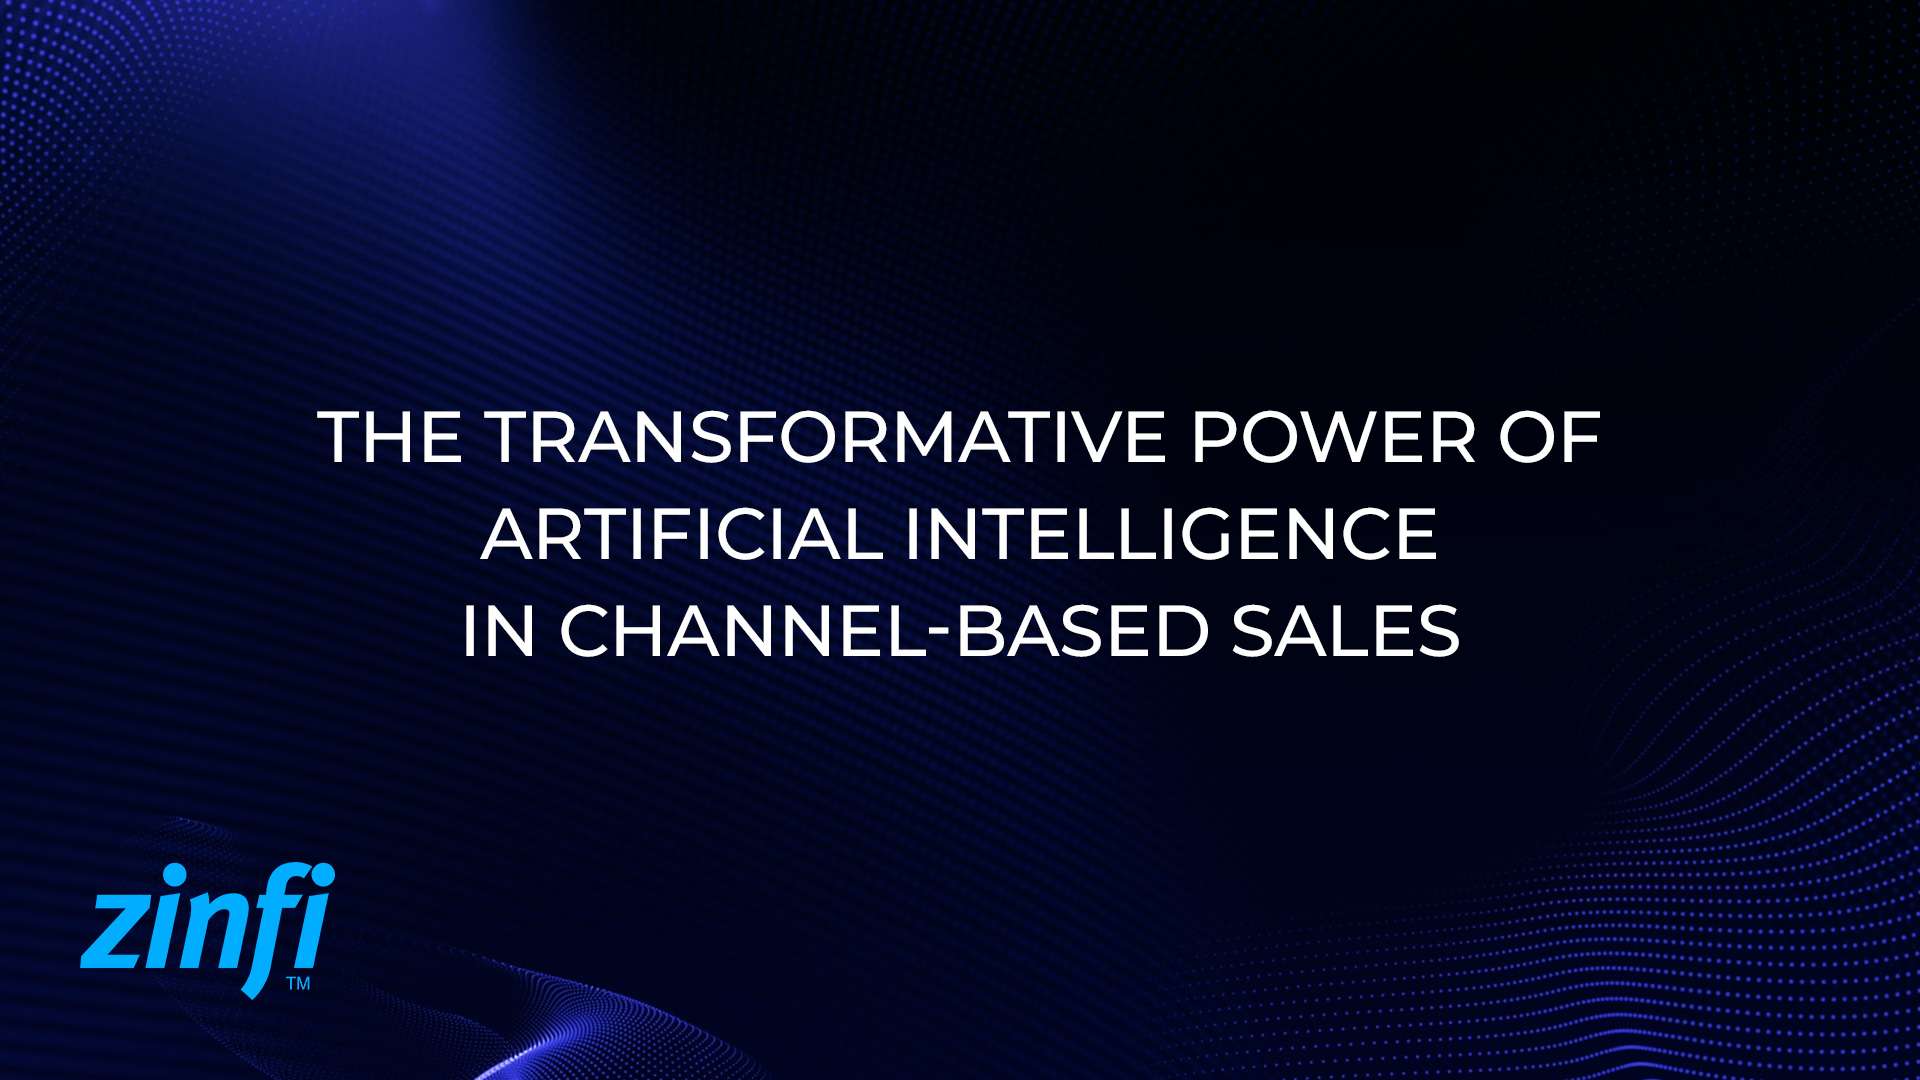 The Transformative Power of Artificial Intelligence in Channel-Based Sales